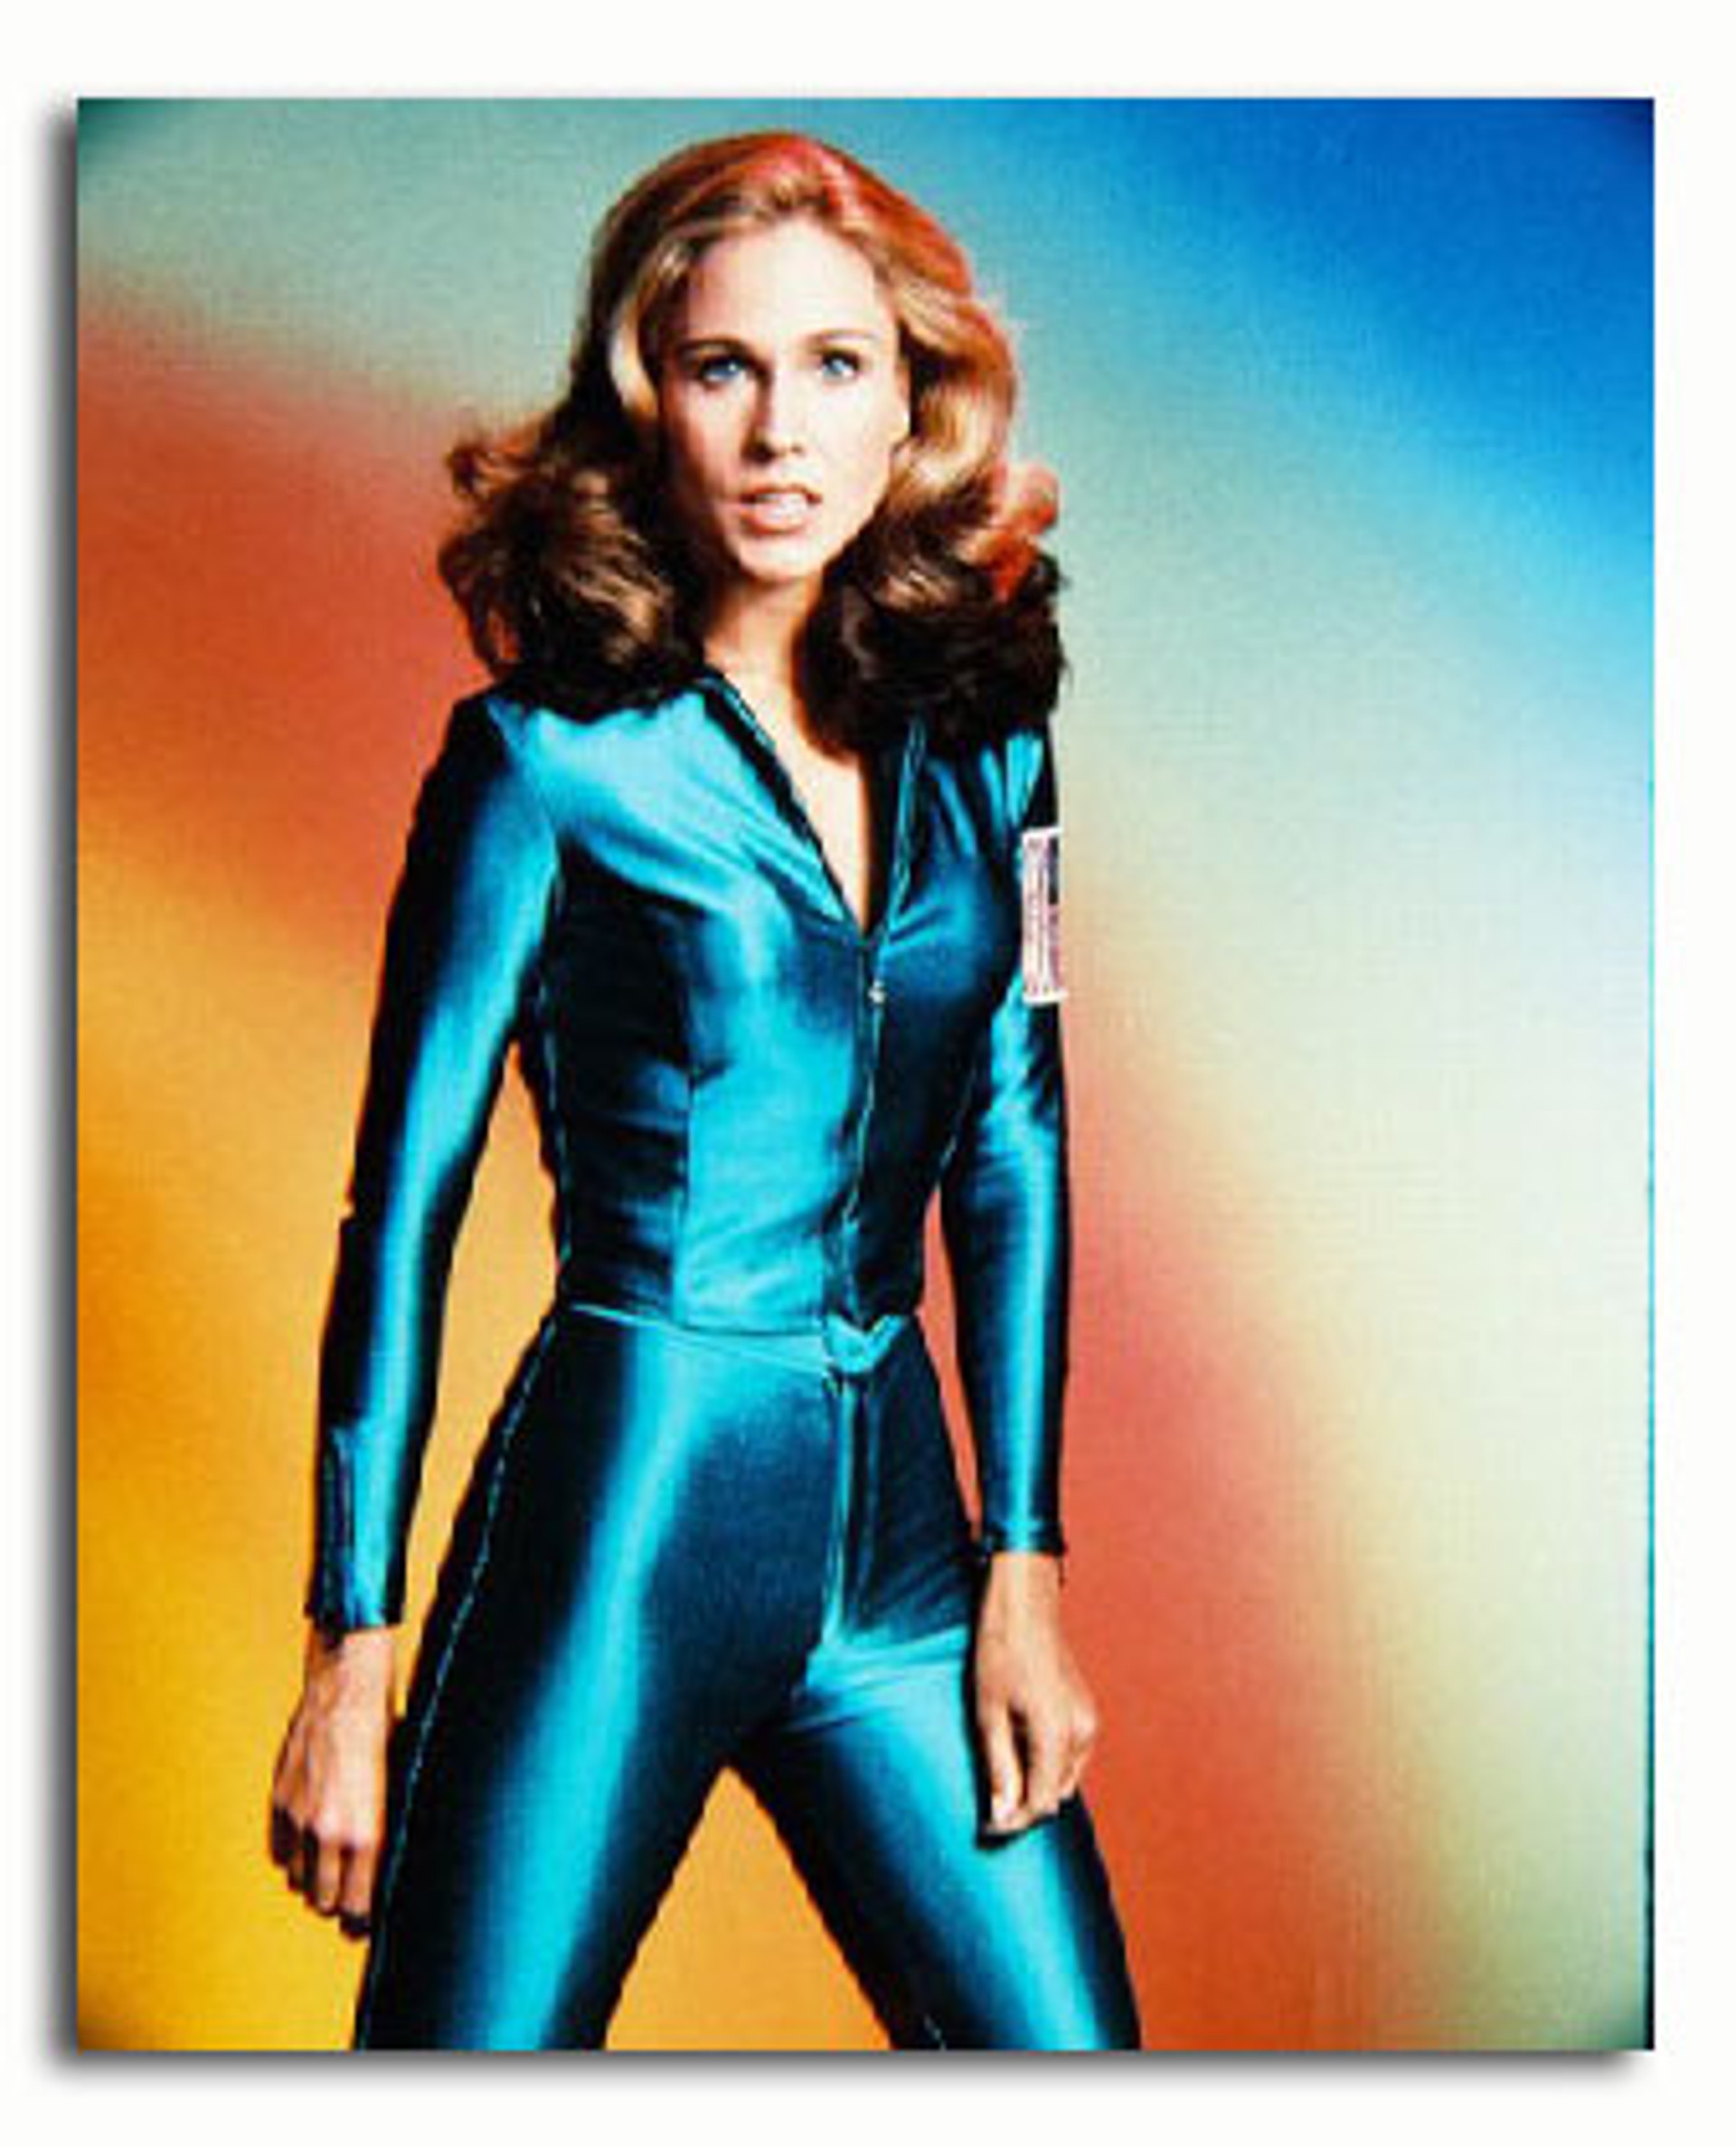 Ss3475628 Movie Picture Of Erin Gray Buy Celebrity Photos And Posters